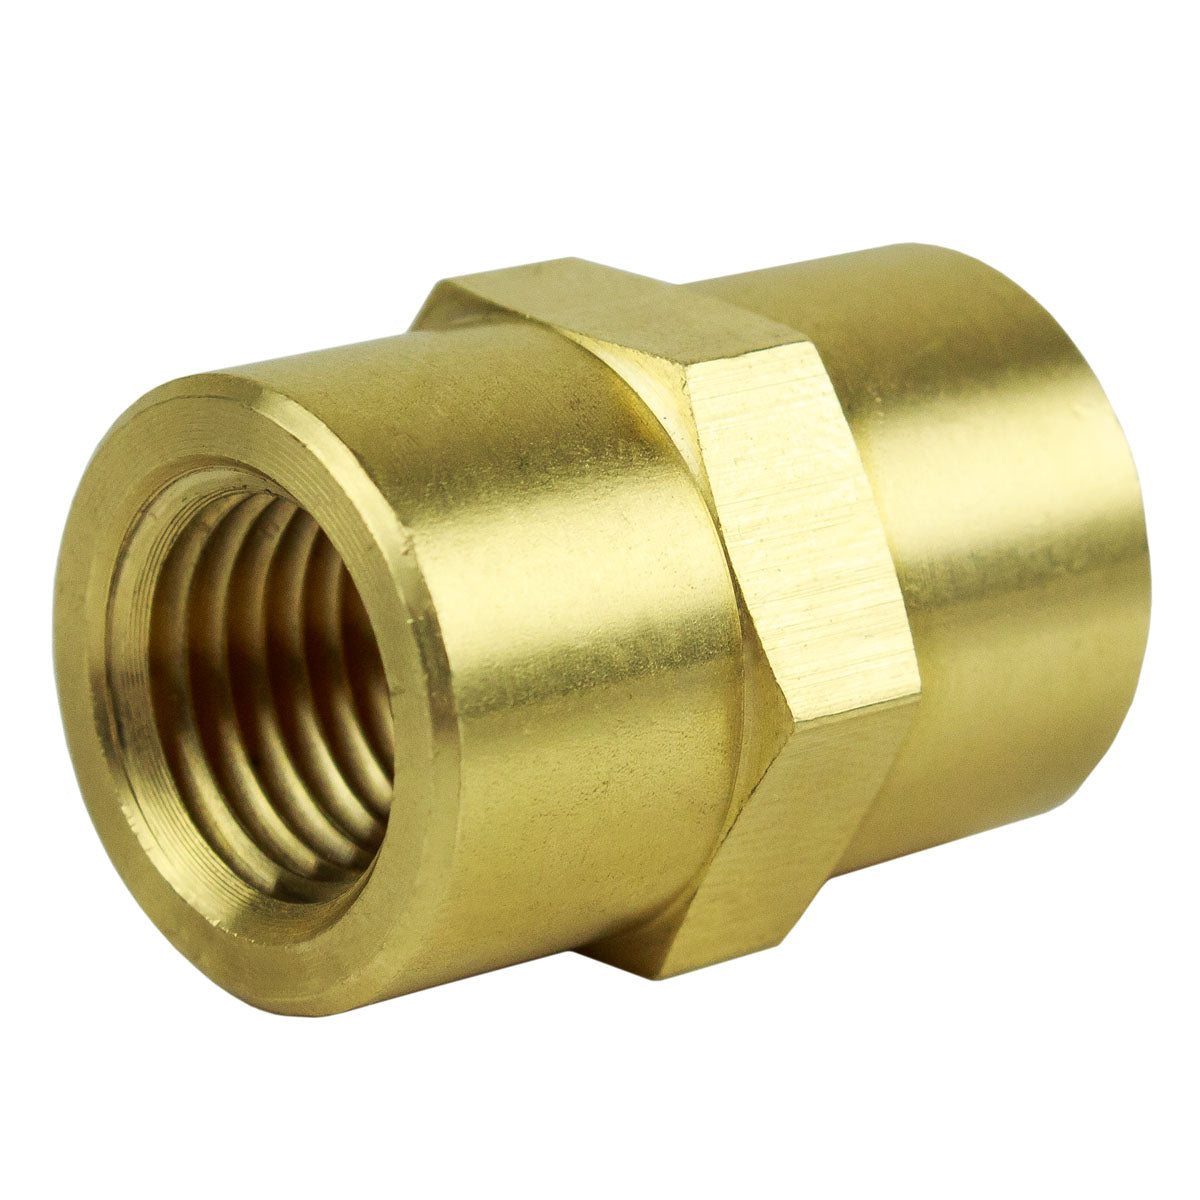 Ten 1/4" NPT Female Solid Brass Pipe Unions Adapter Fitting WOG Solid Connector